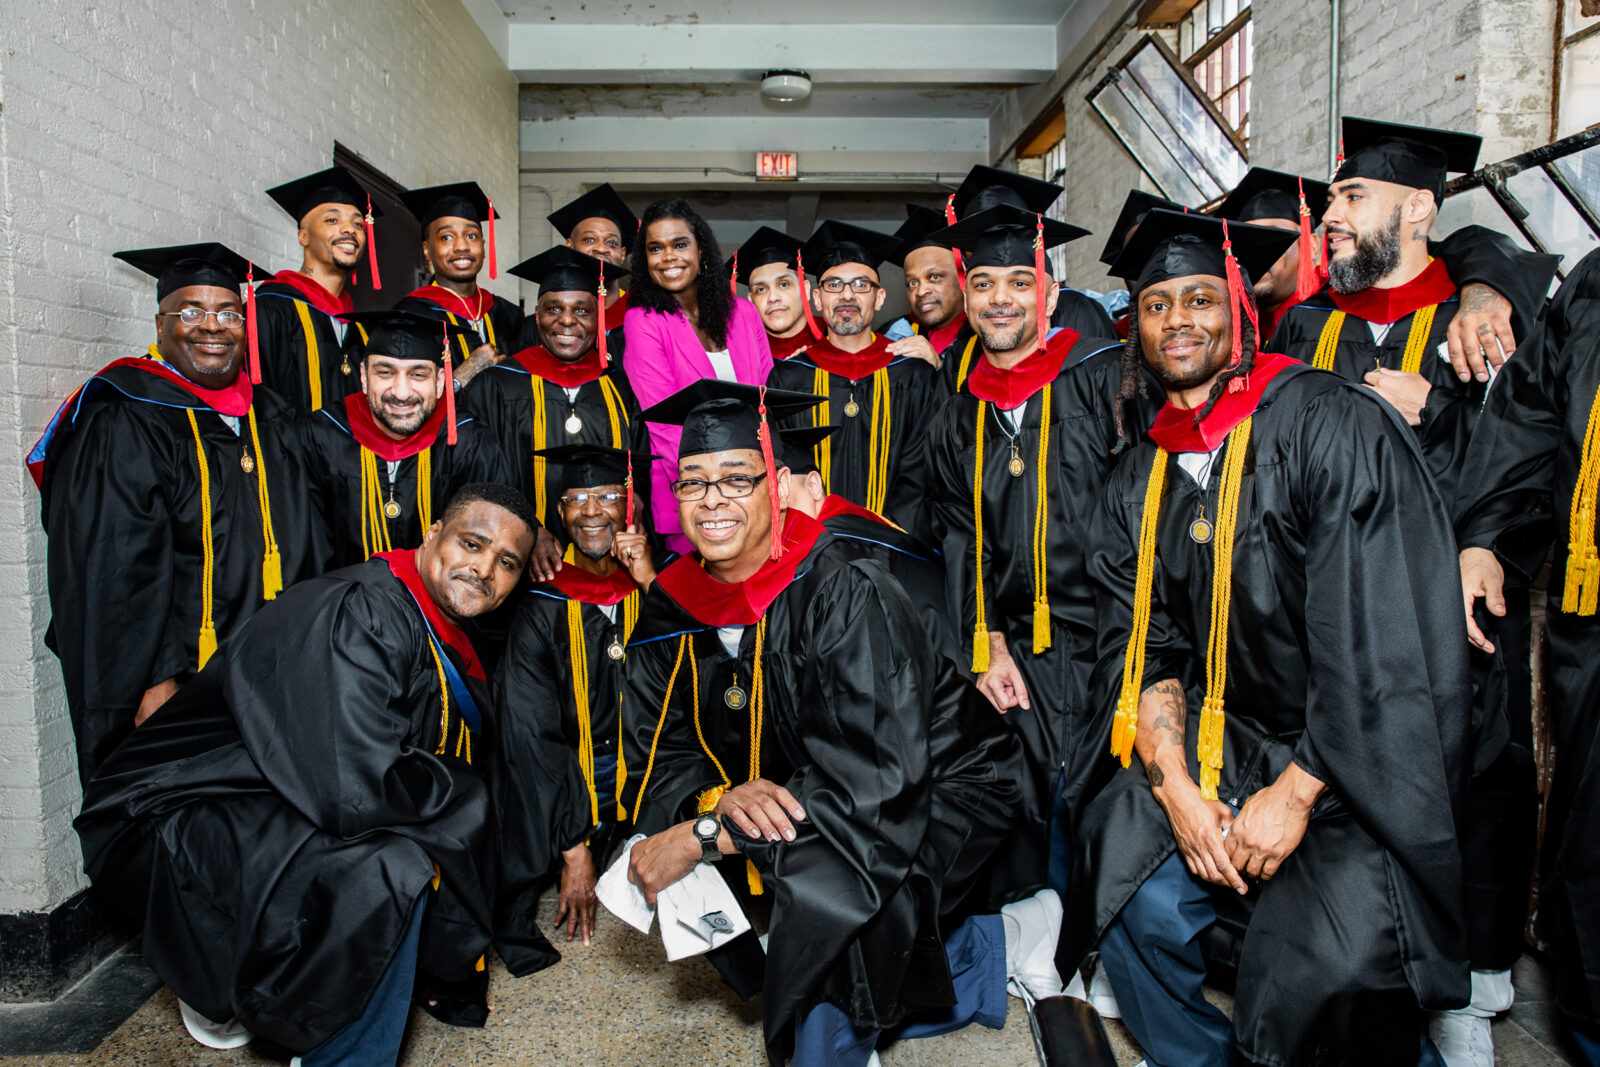 North Park Theological Seminary Awards Master’s Degree to Stateville Correctional Center Resident Scholars